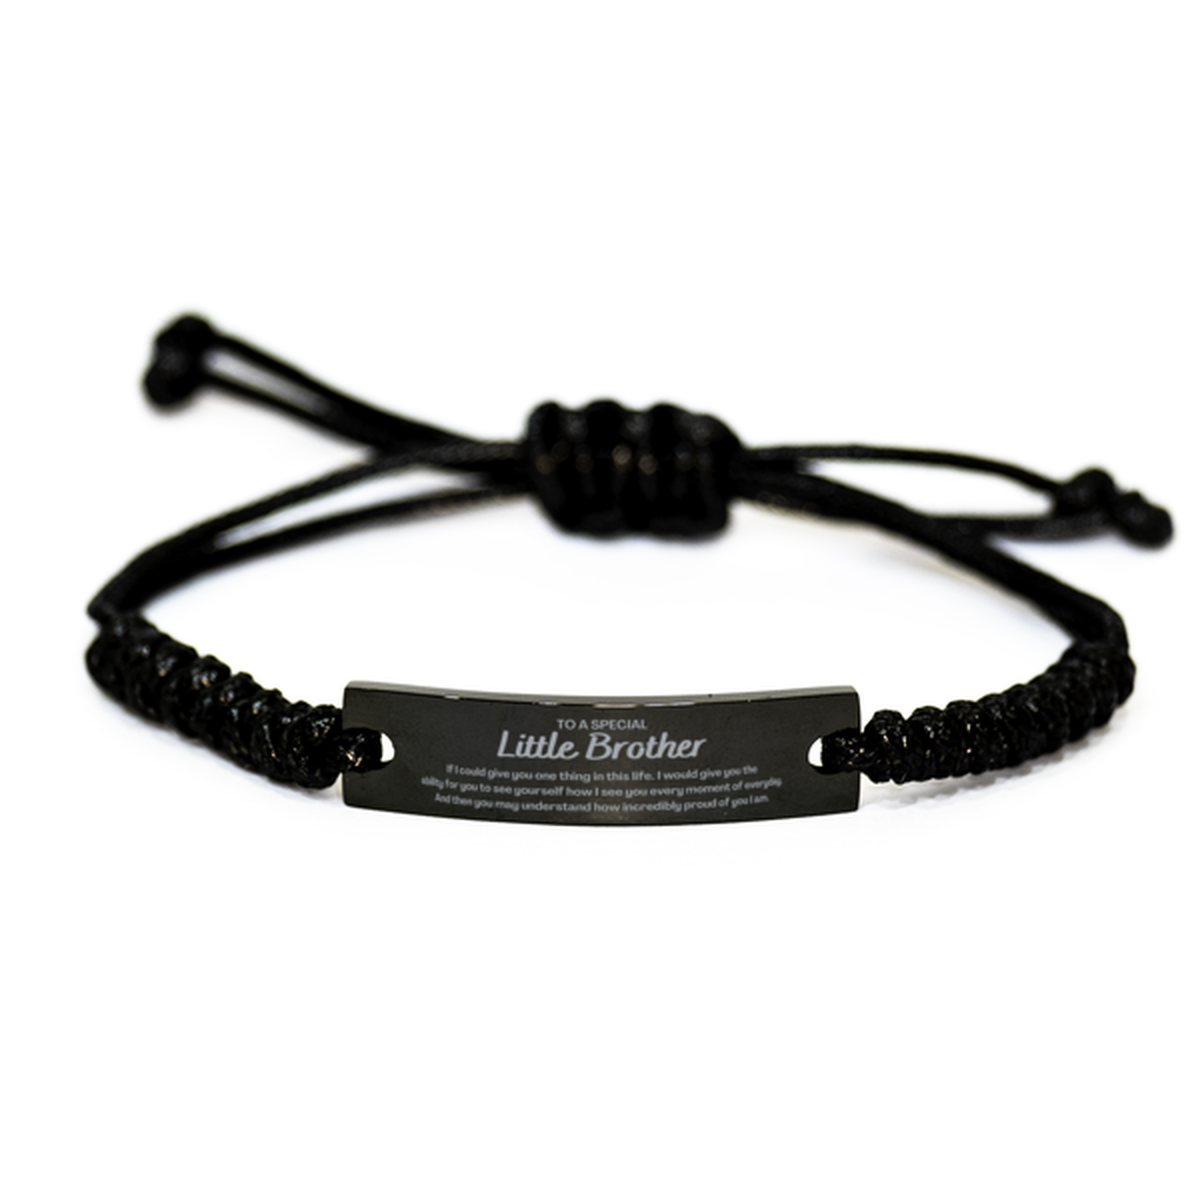 To My Little Brother Black Rope Bracelet, Gifts For Little Brother Engraved, Inspirational Gifts for Christmas Birthday, Epic Gifts for Little Brother To A Special Little Brother how incredibly proud of you I am